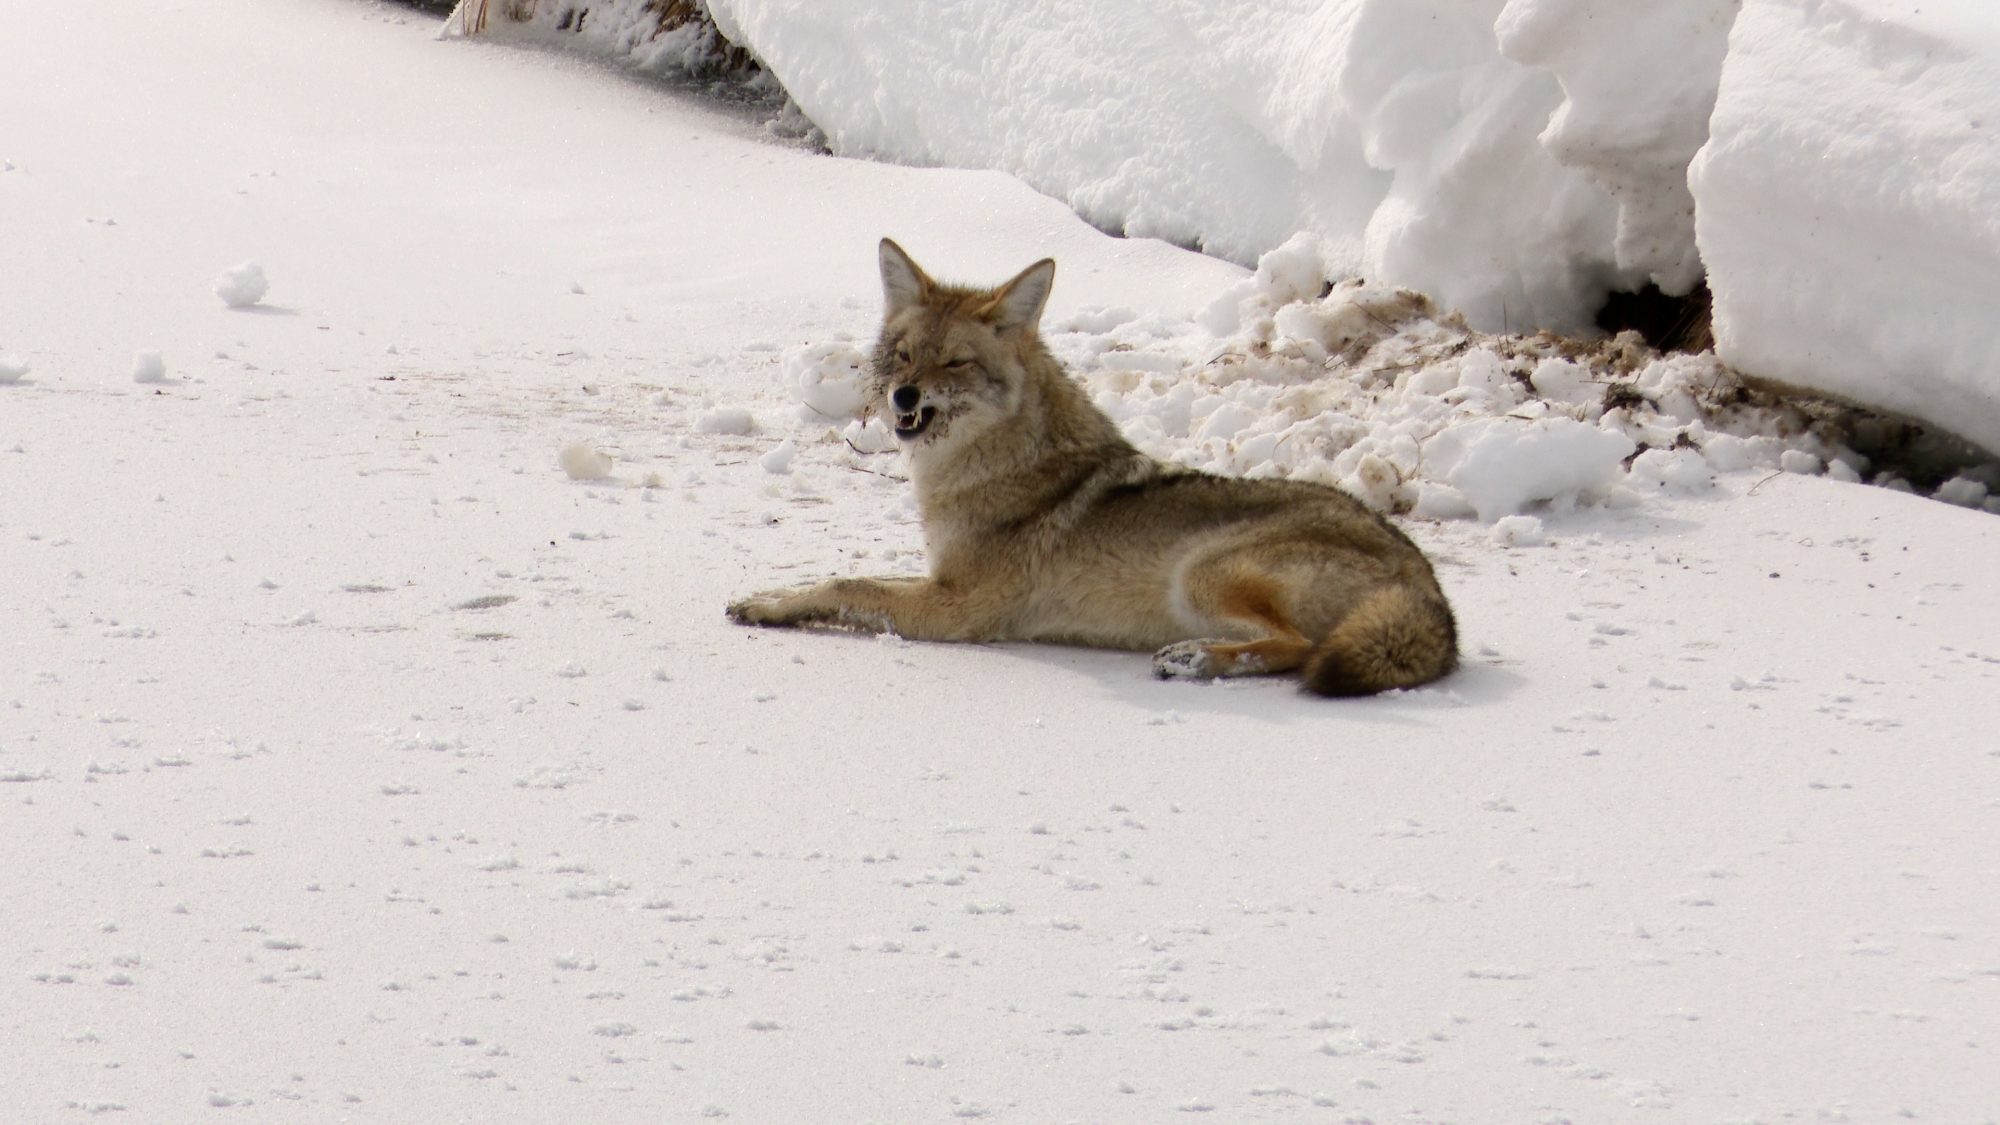 A Coyote scavenging along the river bank – Yellowstone 2019